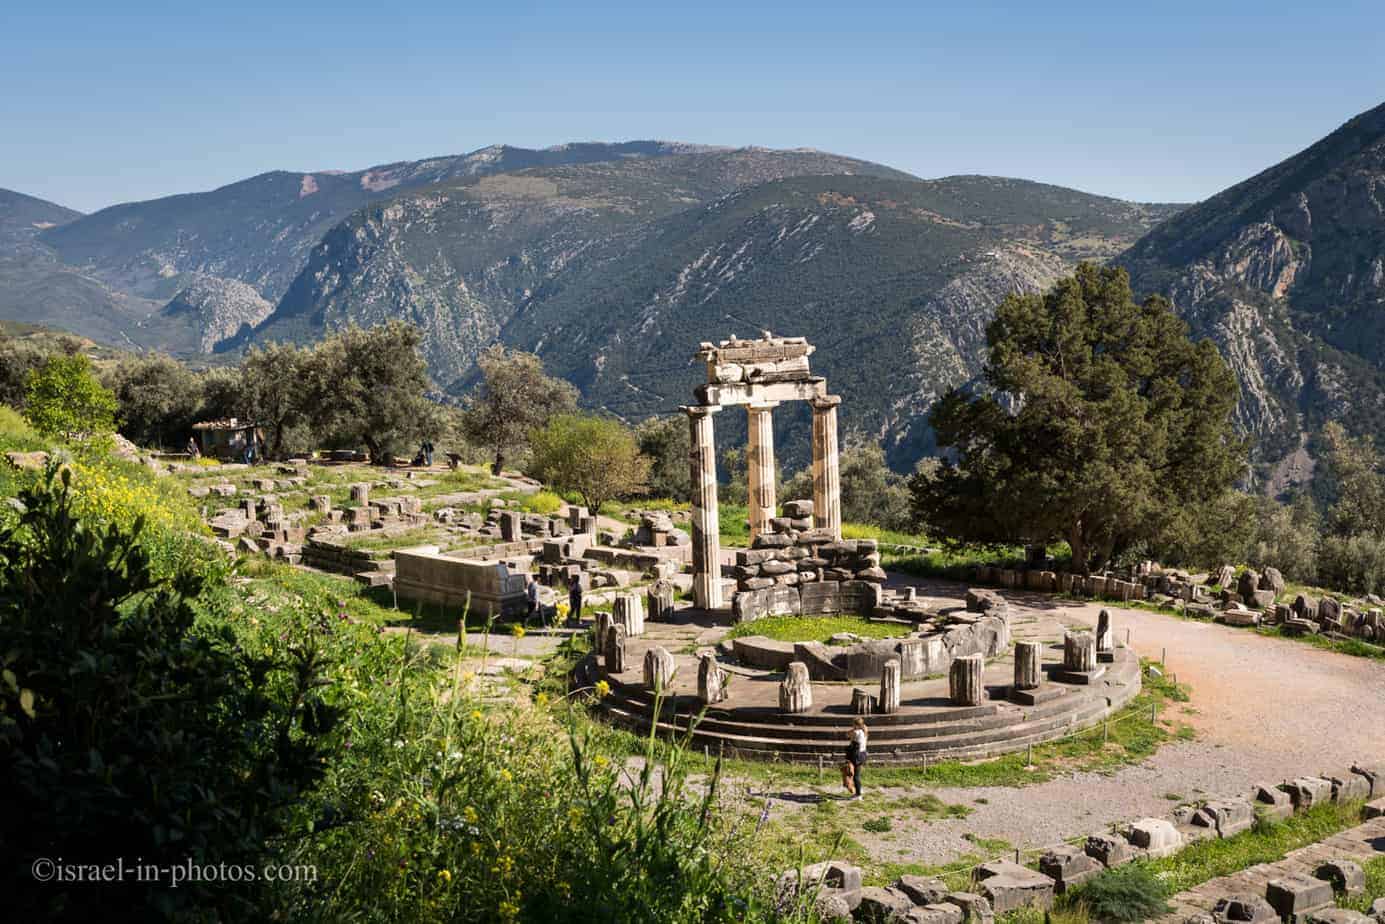 At Delphi archeological site in Greece, Europe